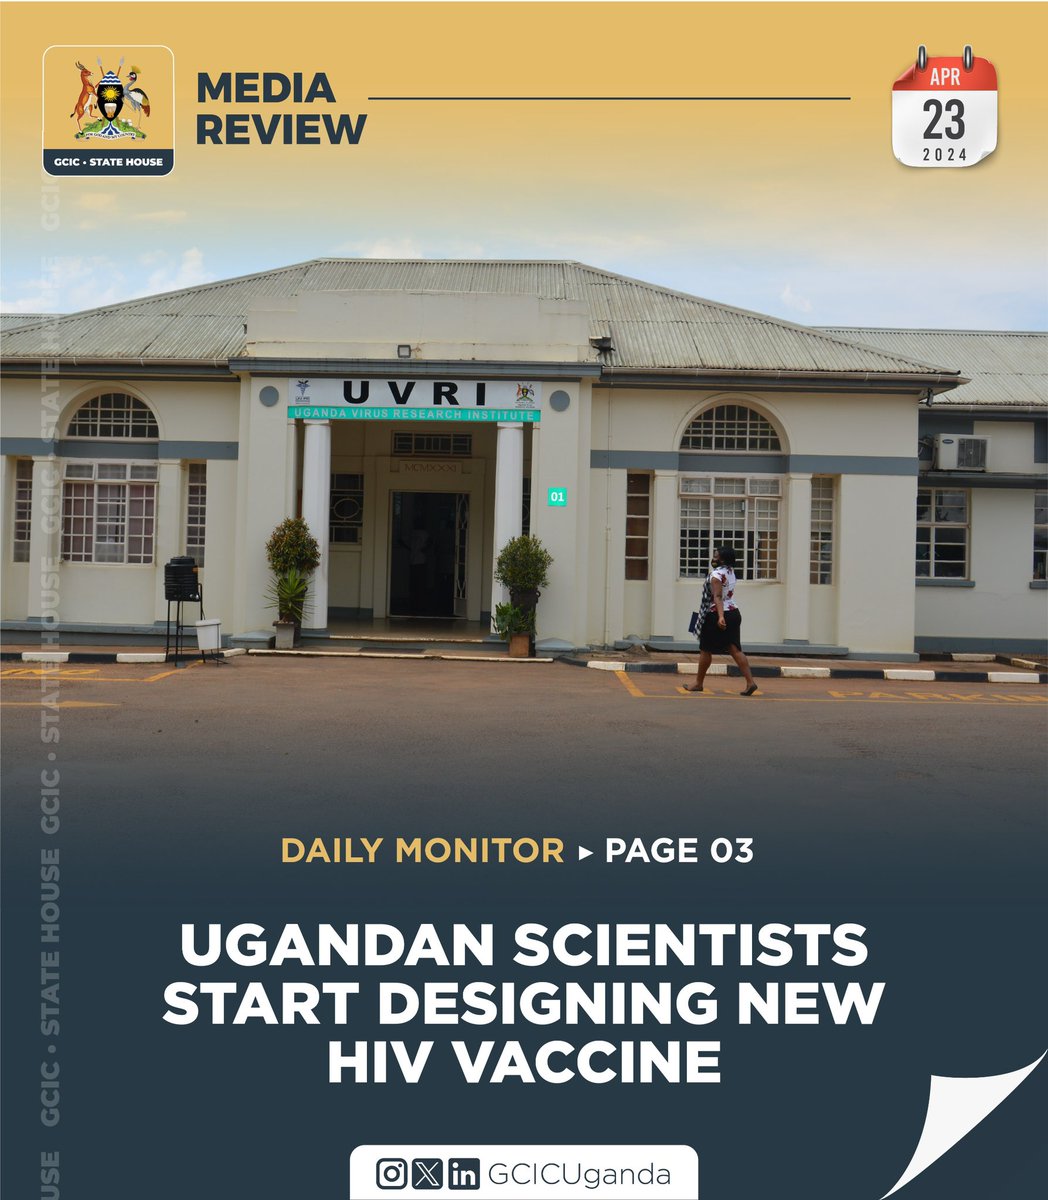 Scientists at the @UVRIug have said they are designing an HIV vaccine to address the high burden of the disease. 
#GCICMediaReview 
#OpenGovUg